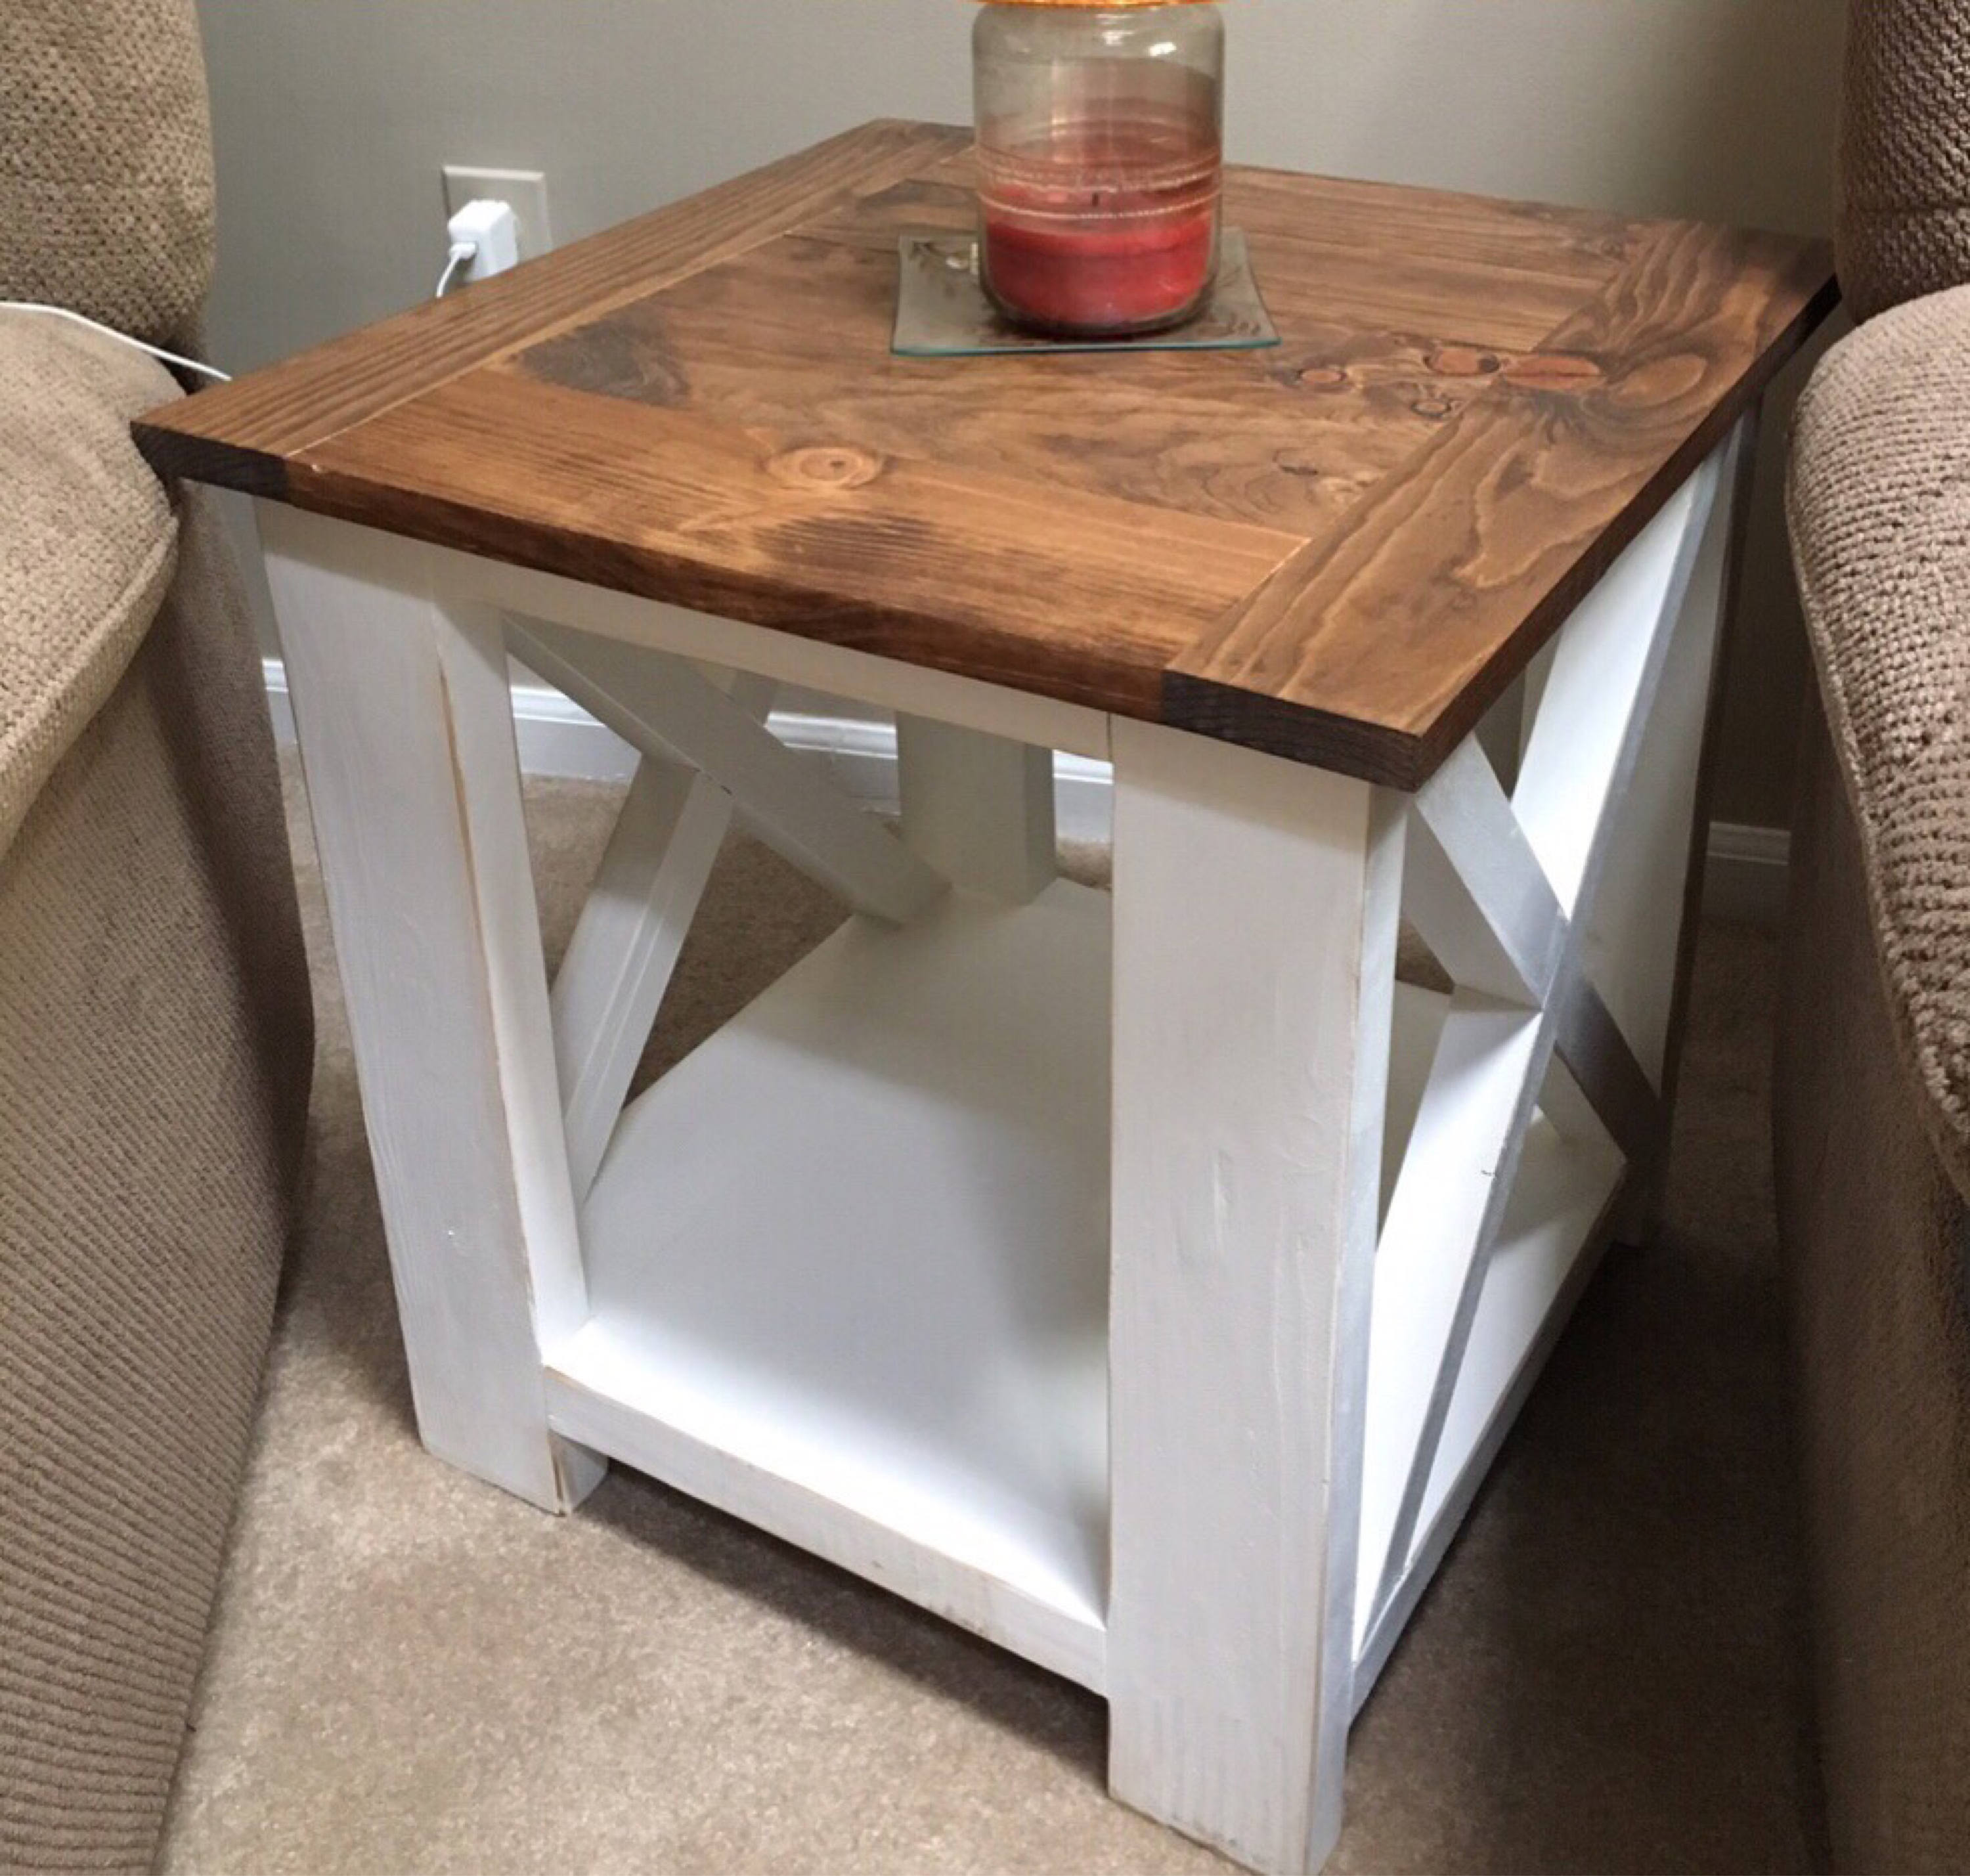 rustic farmhouse end tables set etsy fullxfull repainting furniture distressed look where ethan allen made corey coffee table magnussen assembly instructions designer toronto dog